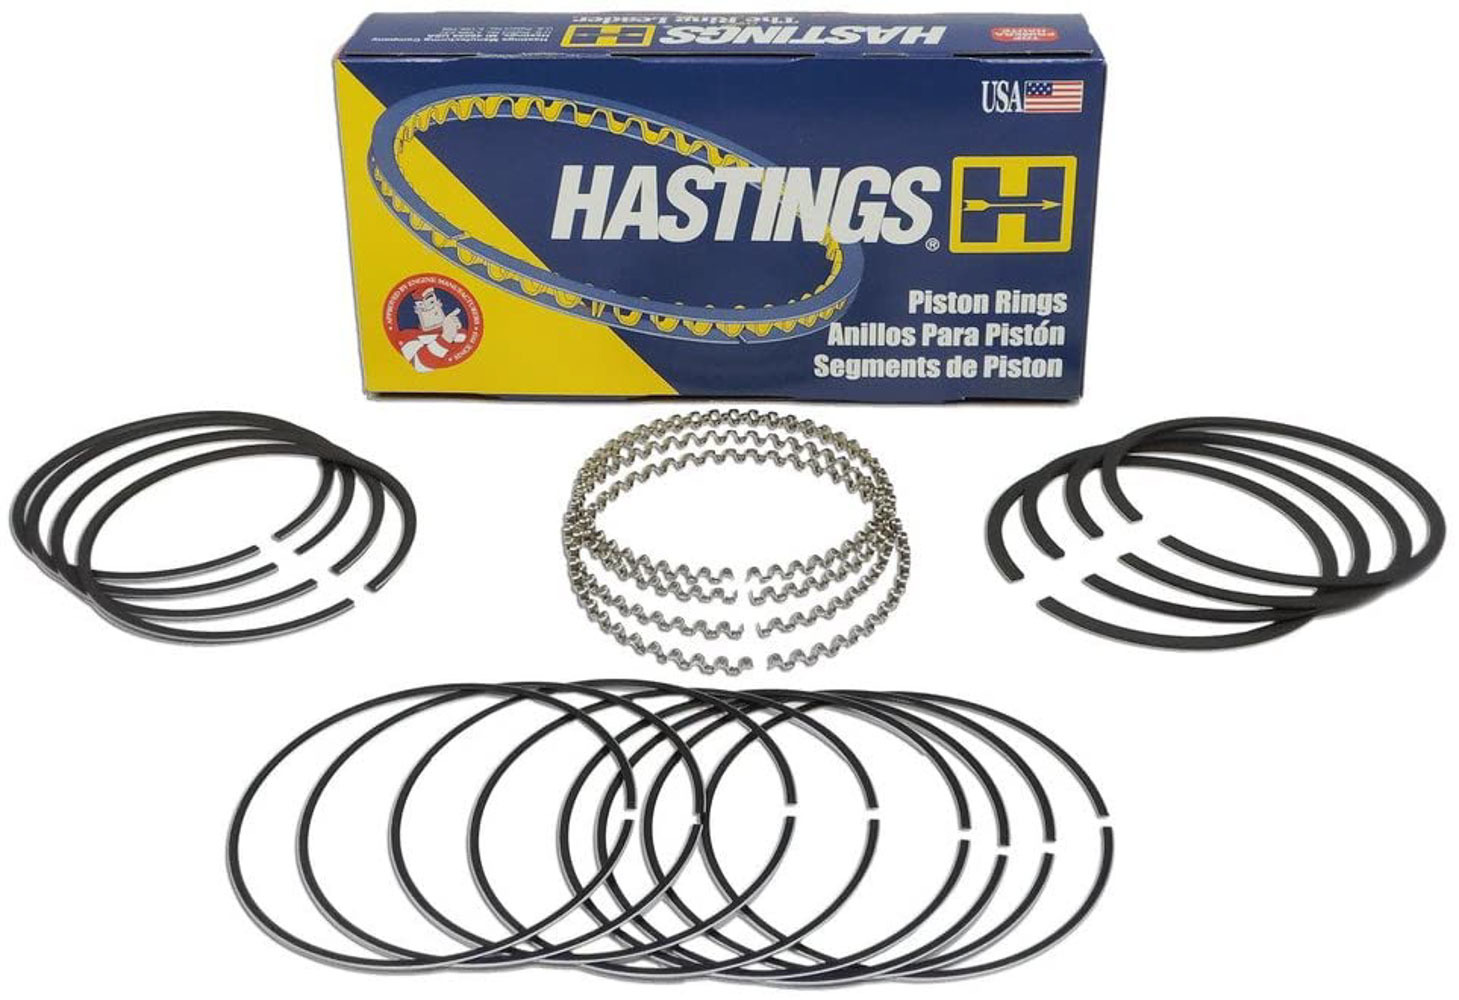 Hastings Piston Rings 5499 Piston Rings, 3.736 in Bore, Drop In, 5/64 x 5/64 x 3/16 in Thick, Standard Tension, Iron, Phosphate, 8-Cylinder, Kit